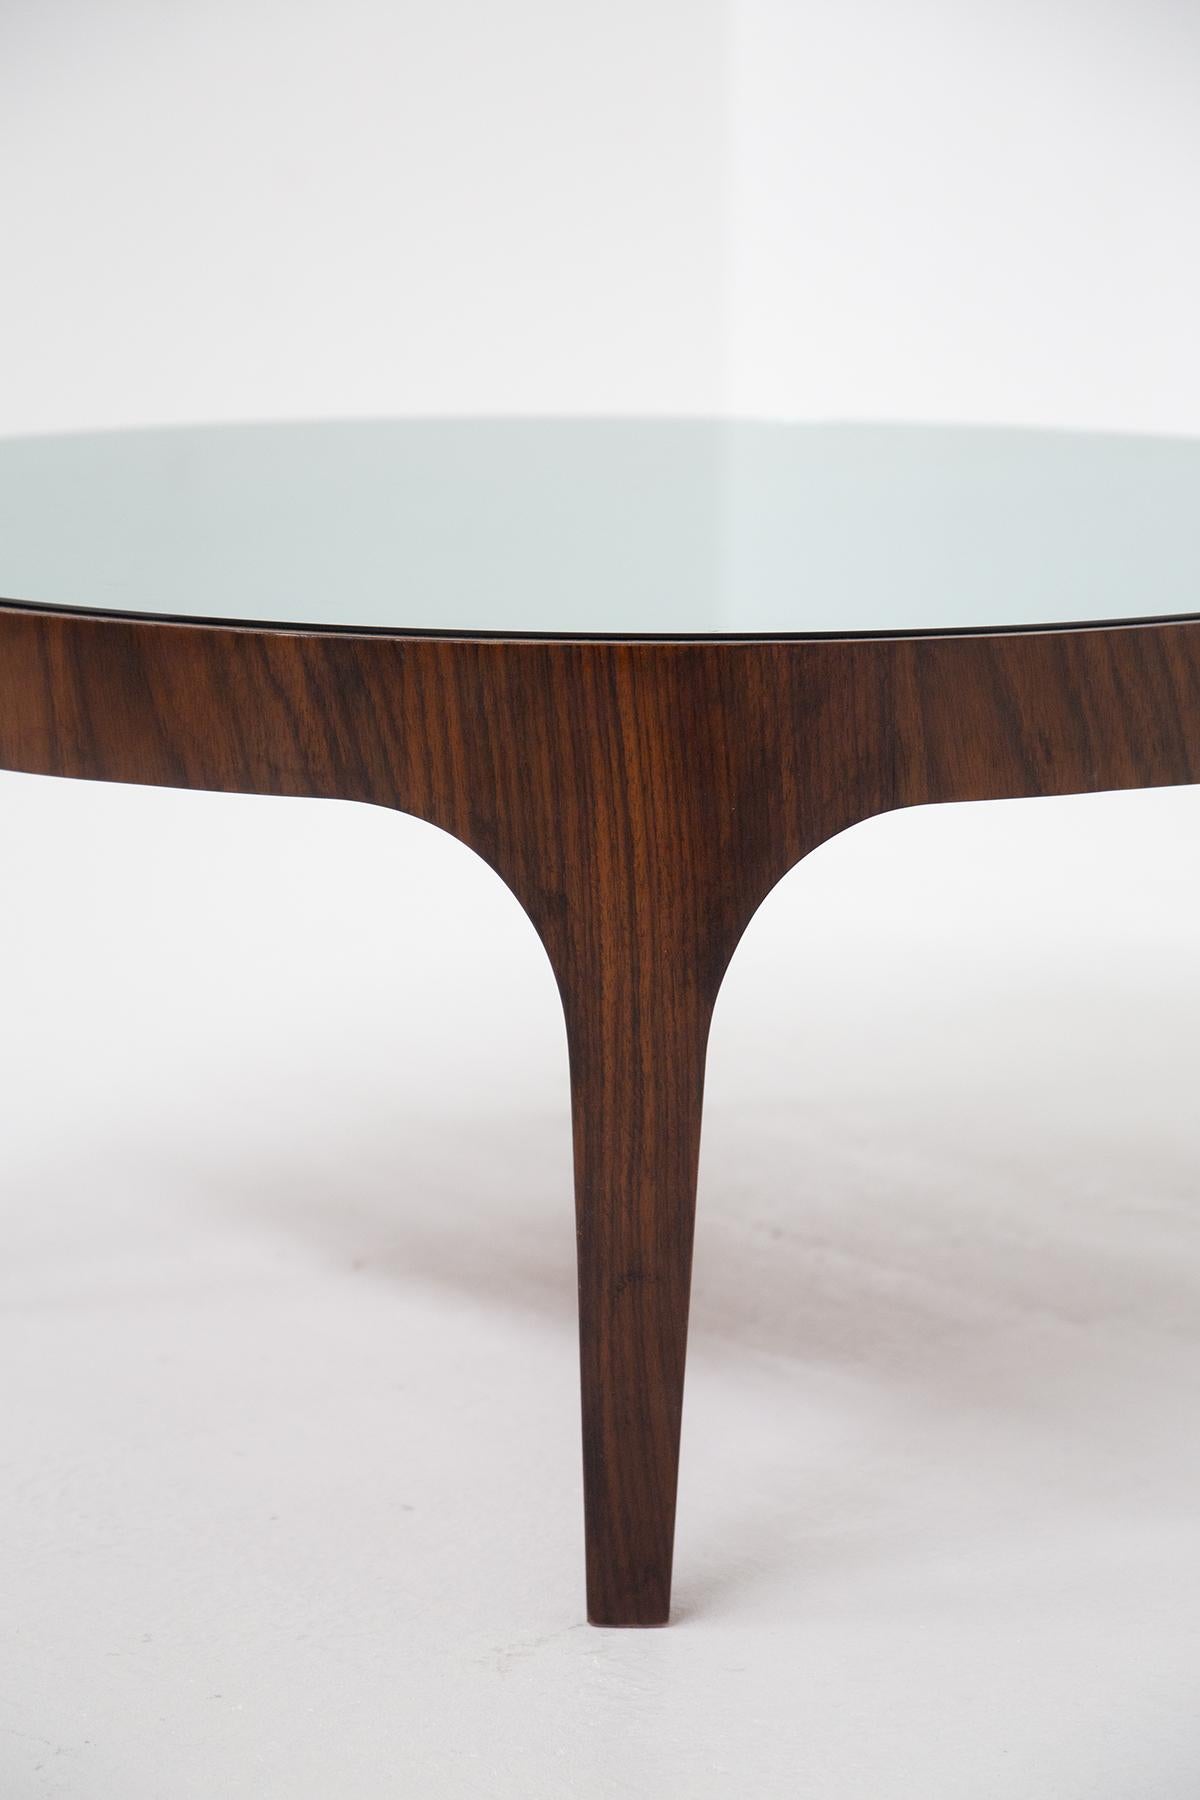 Mid-20th Century Coffe Table with Light Blue Glass by Fontana Arte, Manufacturer's Label